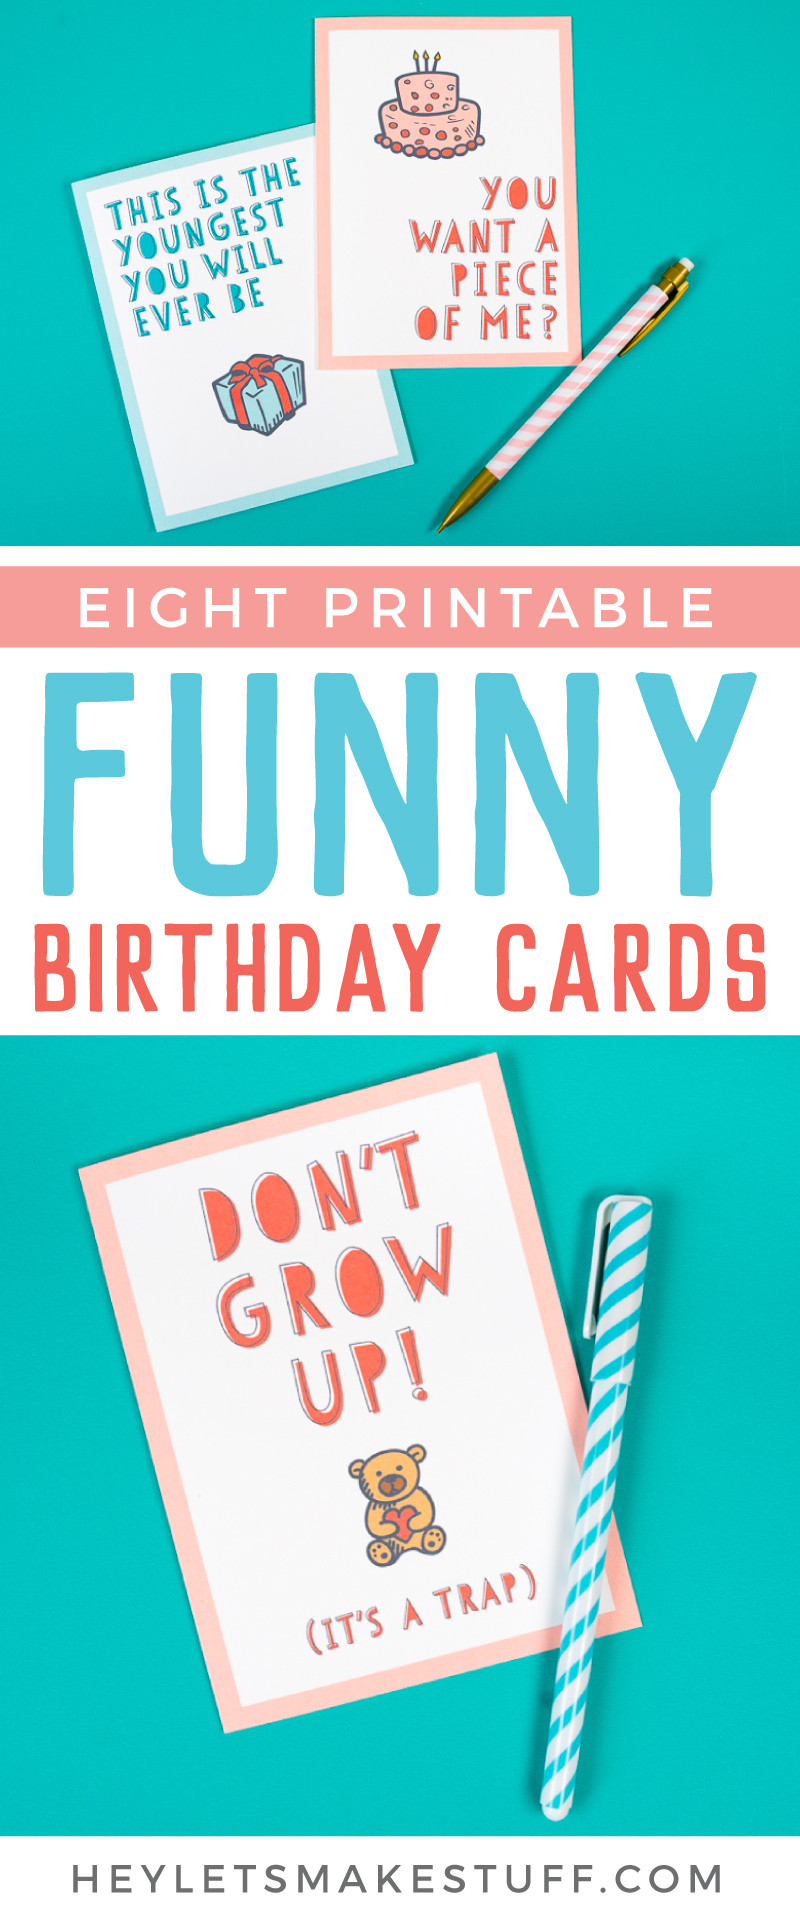 Free Printable Birthday Cards For Adults
 Free Funny Printable Birthday Cards for Adults Eight